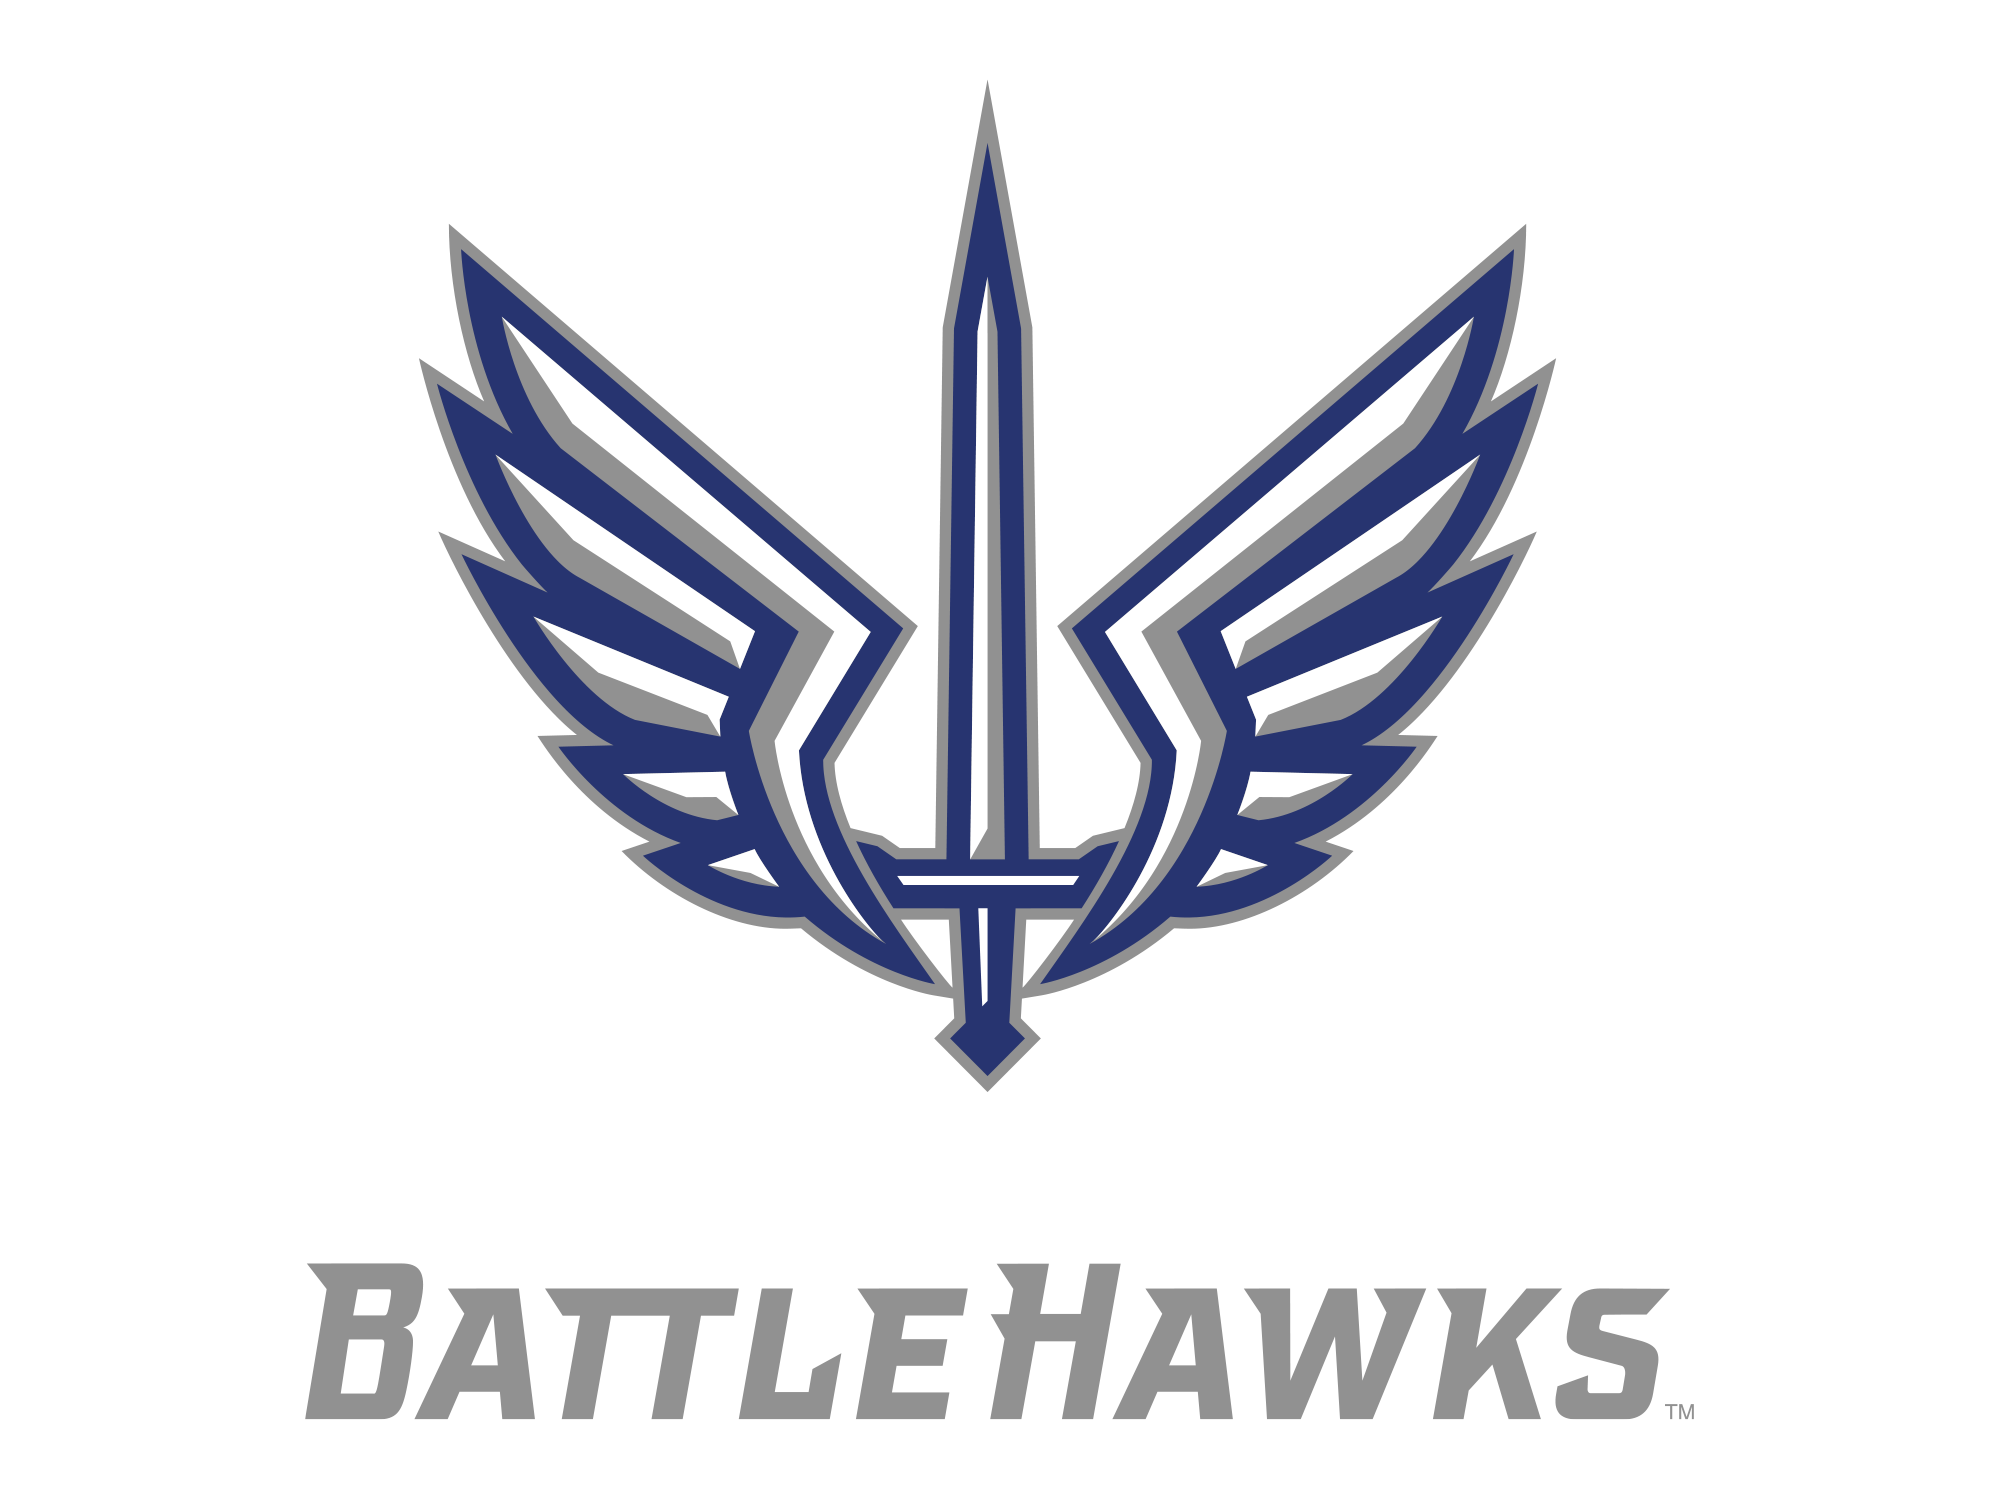 St. Louis will be one of the teams in the 2023 XFL